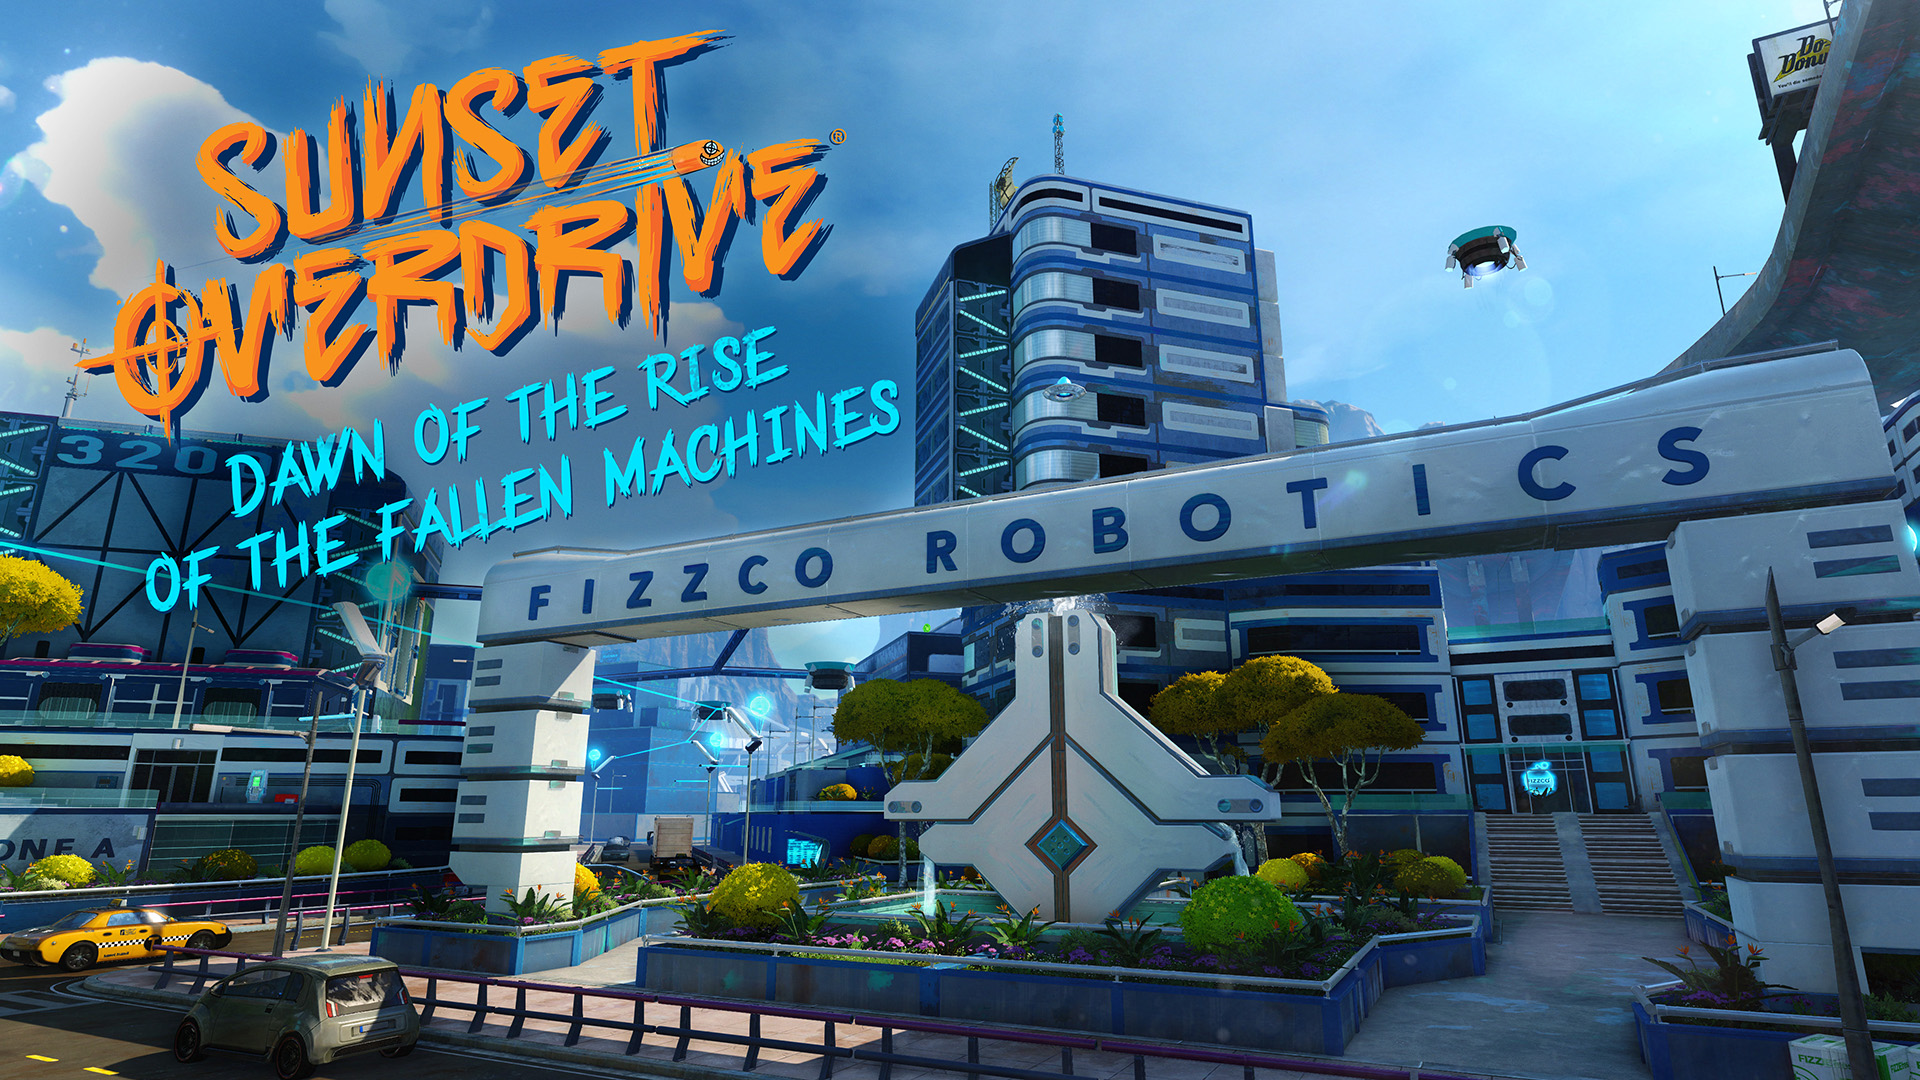 Sunset Overdrive REVEAL TRAILER! Xbox One Title from Insomniac Games 